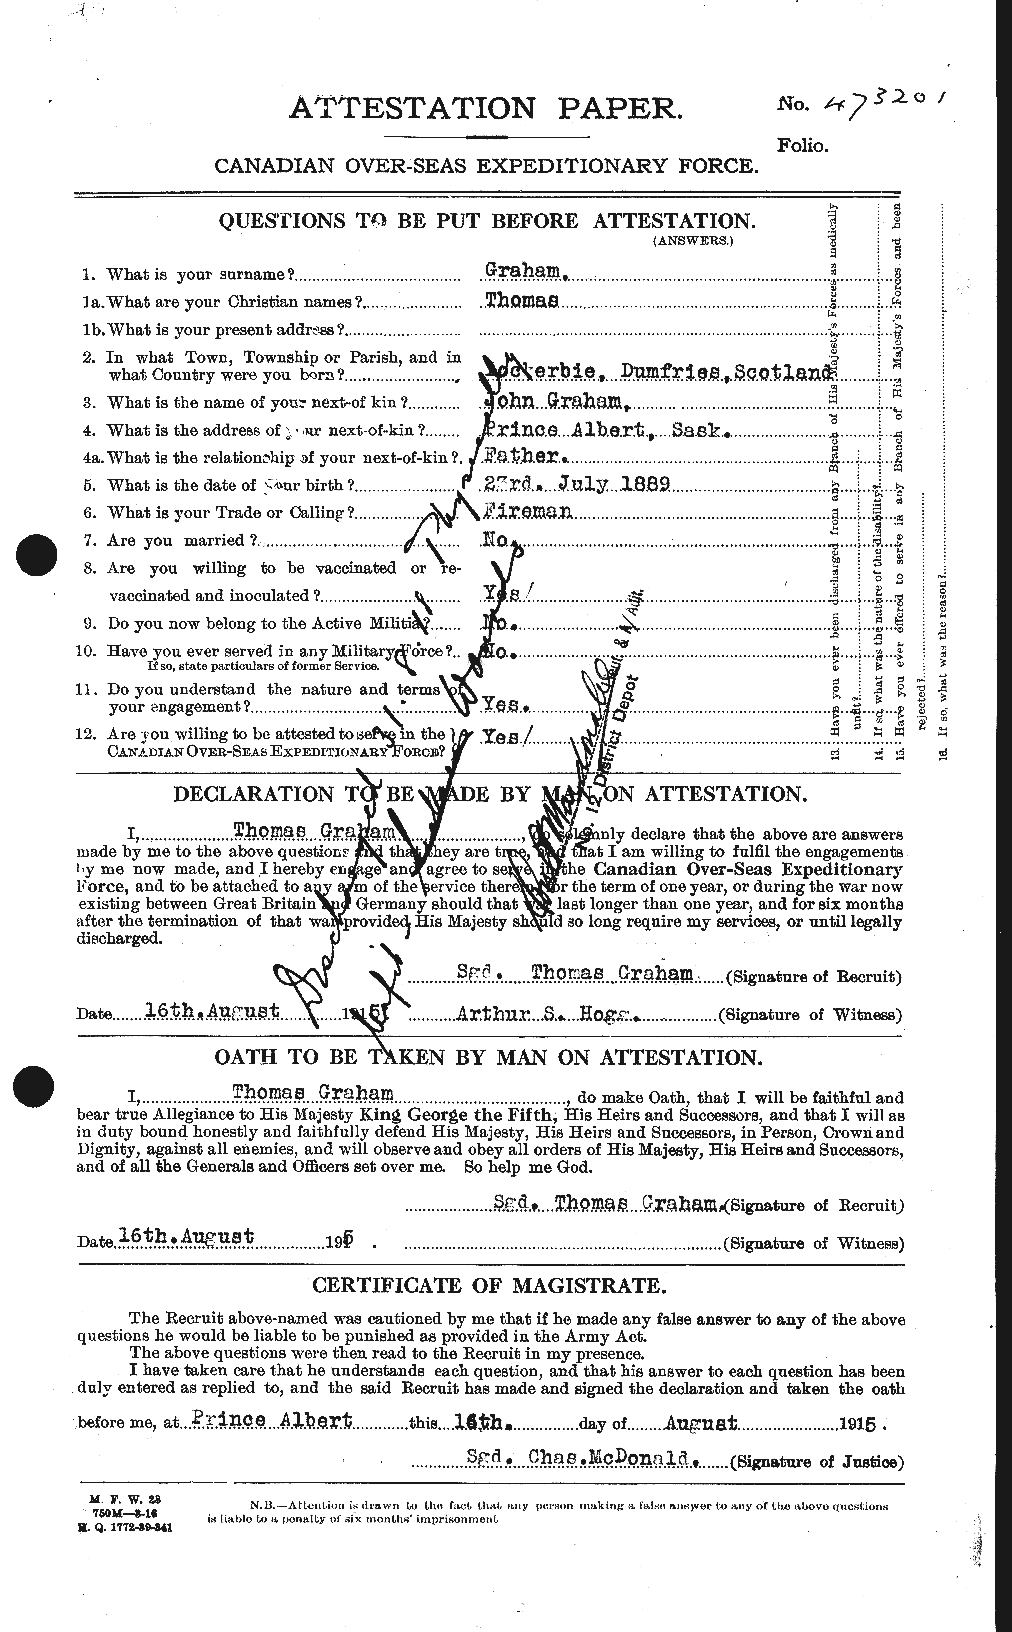 Personnel Records of the First World War - CEF 359484a